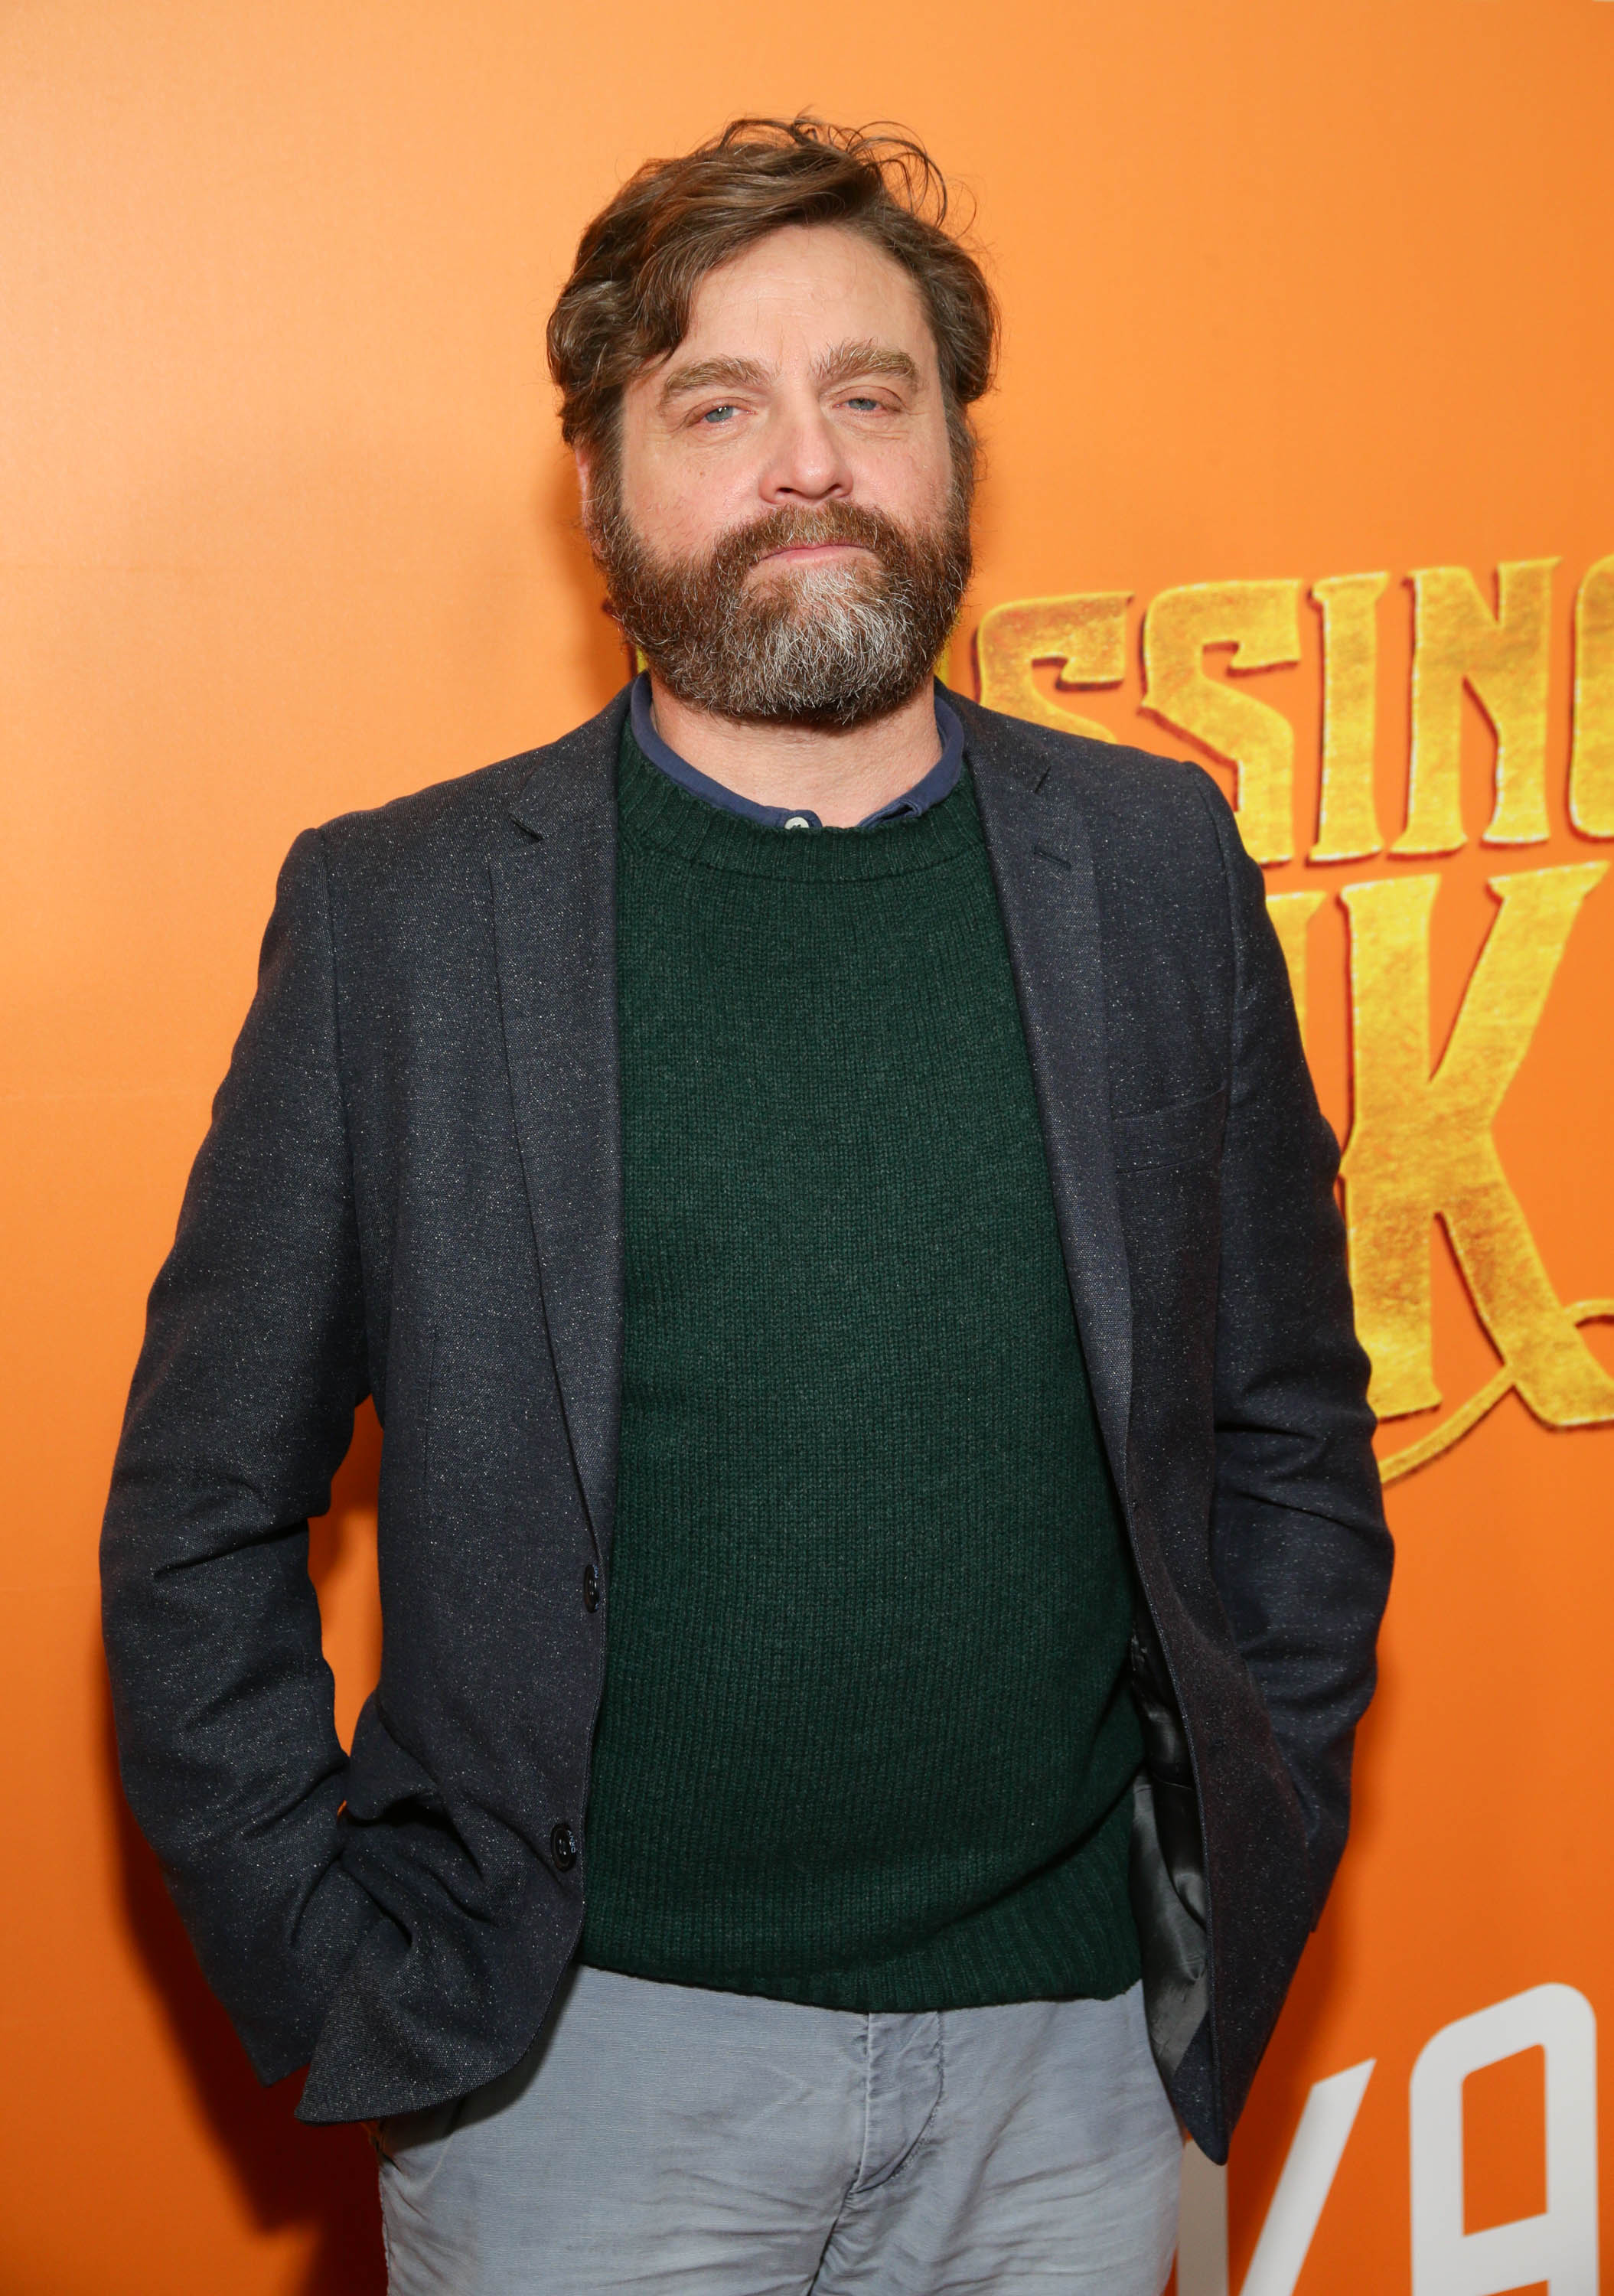 Zach Galifianaki at the 'Missing Link' film premiere in New York, on April 7, 2019. | Source: Getty Images